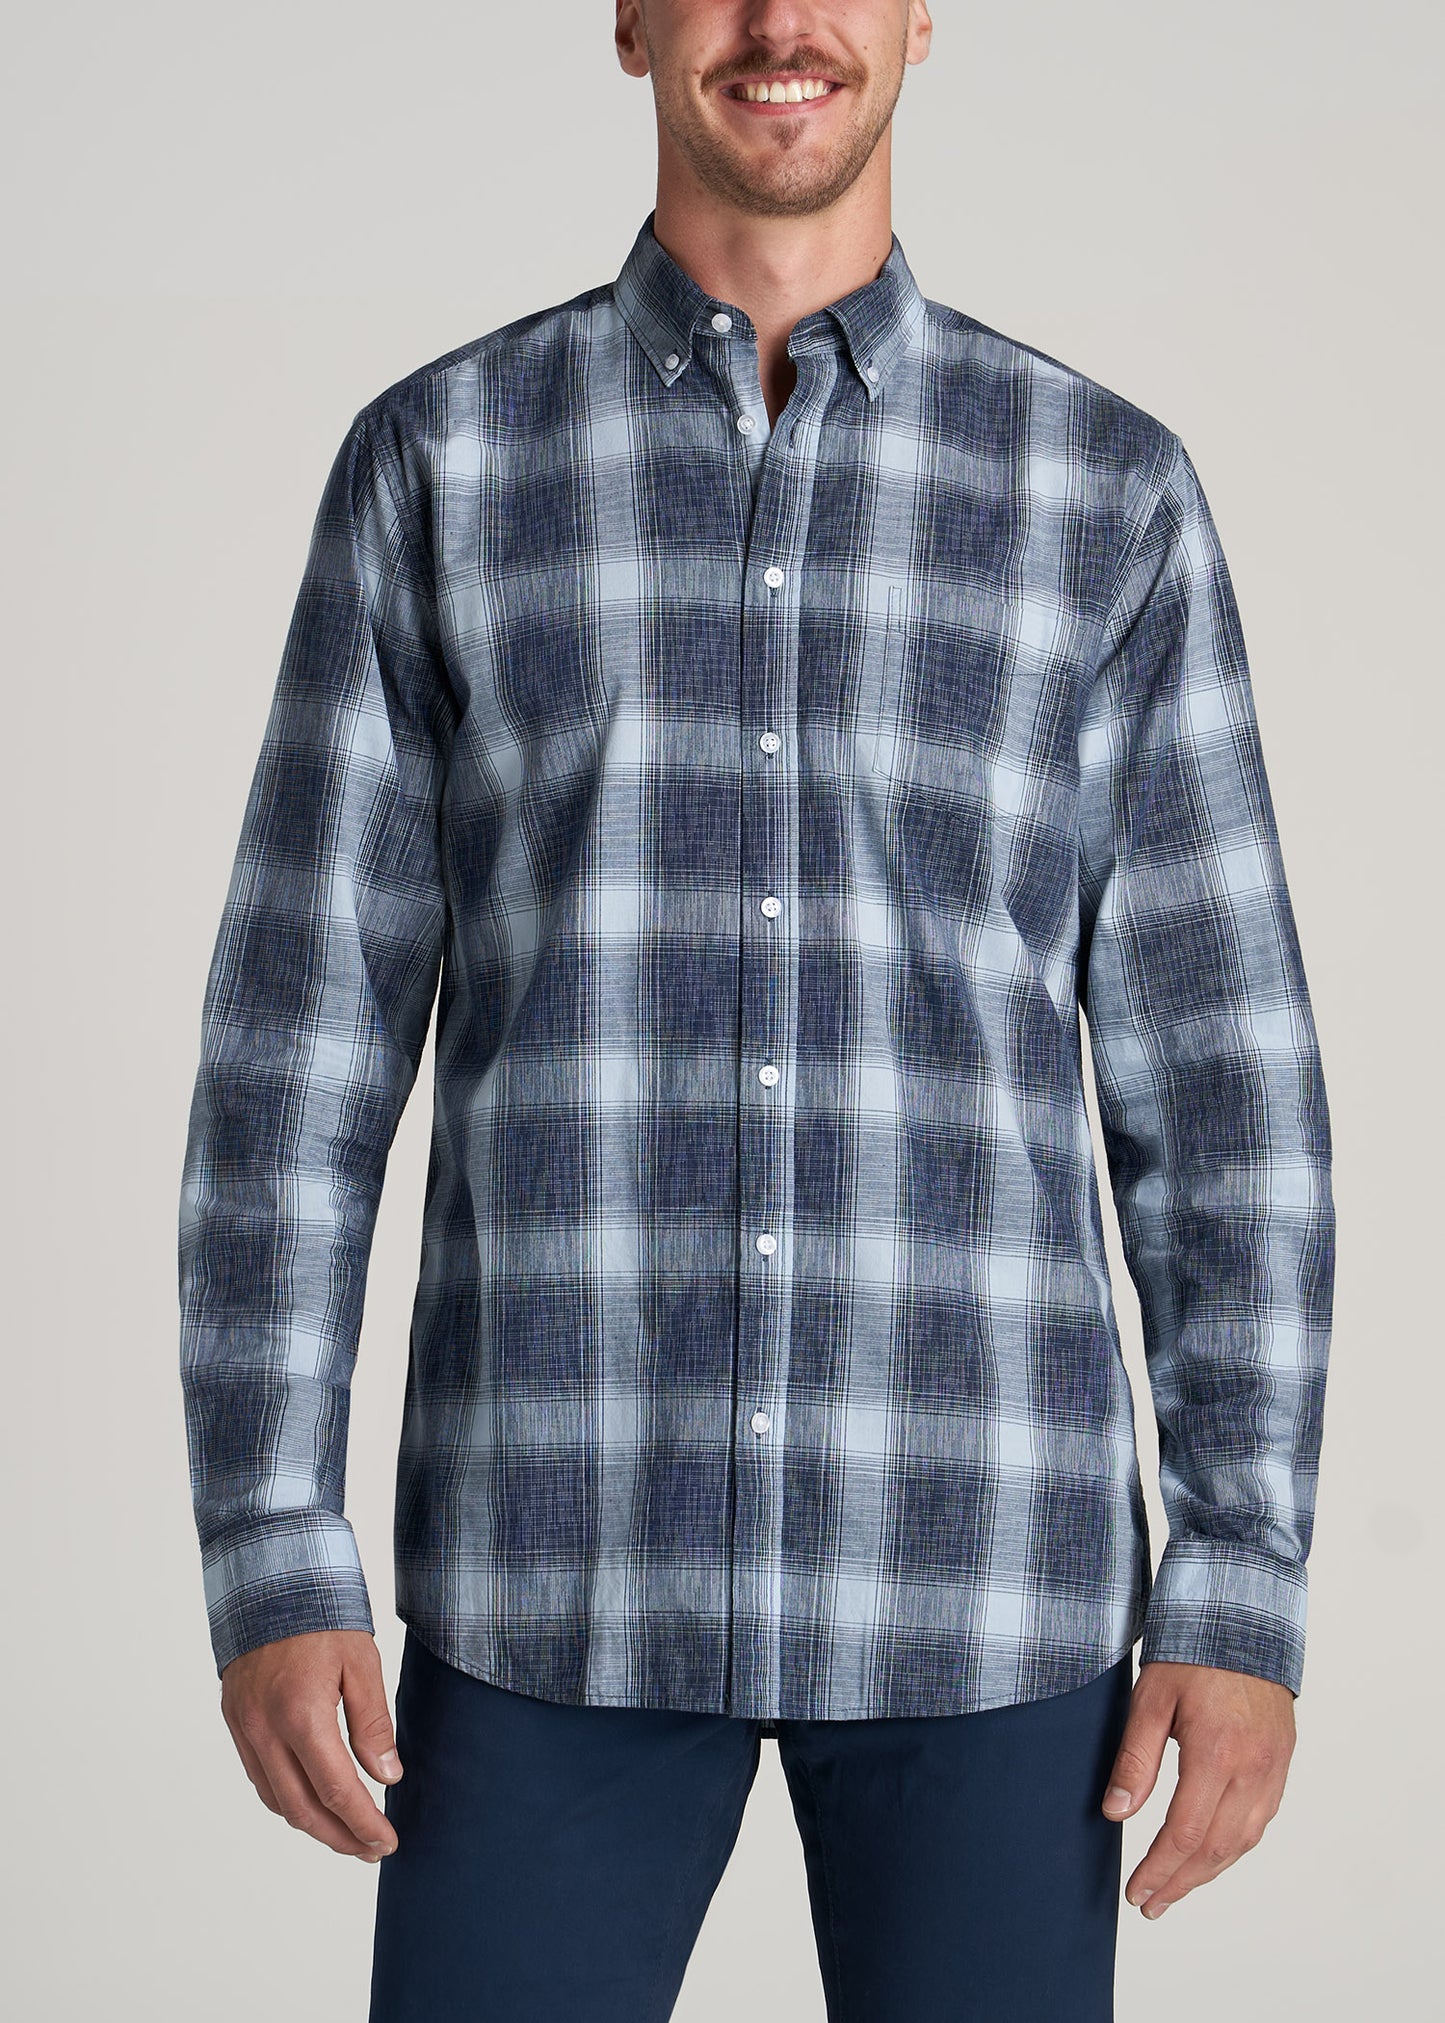        American-Tall-Men-Soft-Wash-Blue-Plaid-front